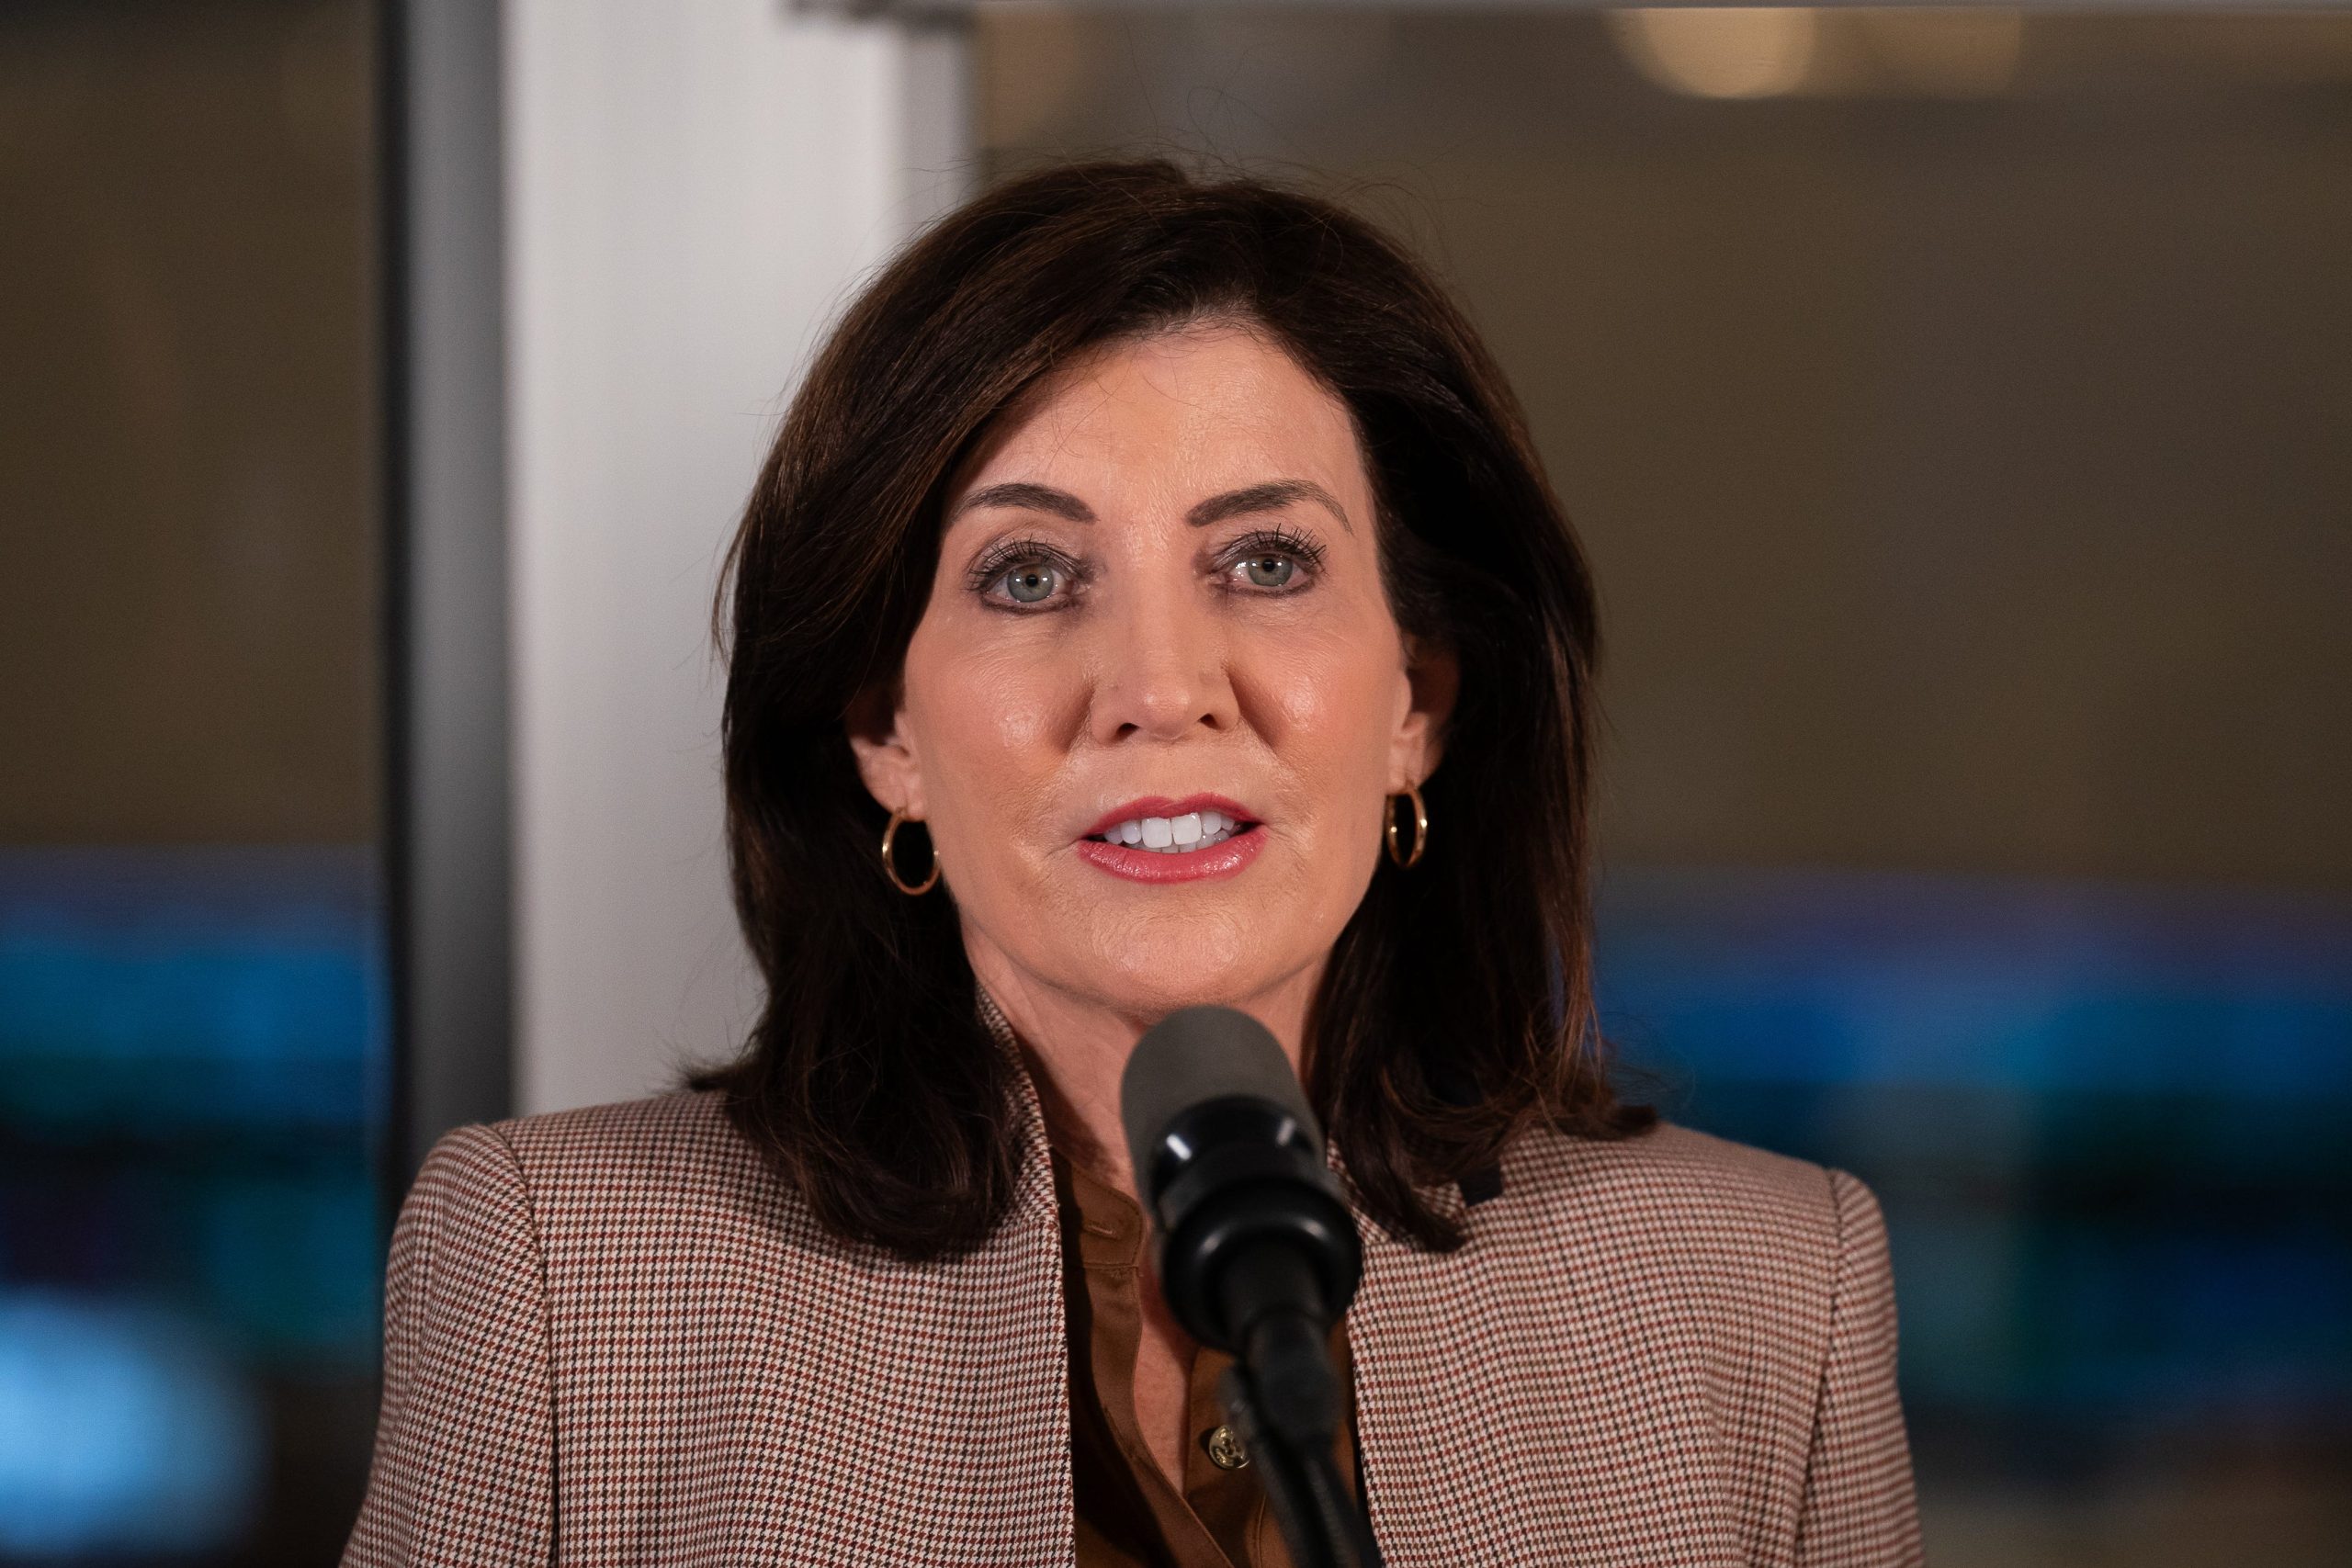 Gov. Kathy Hochul addresses indefinite pause in congestion [Video]